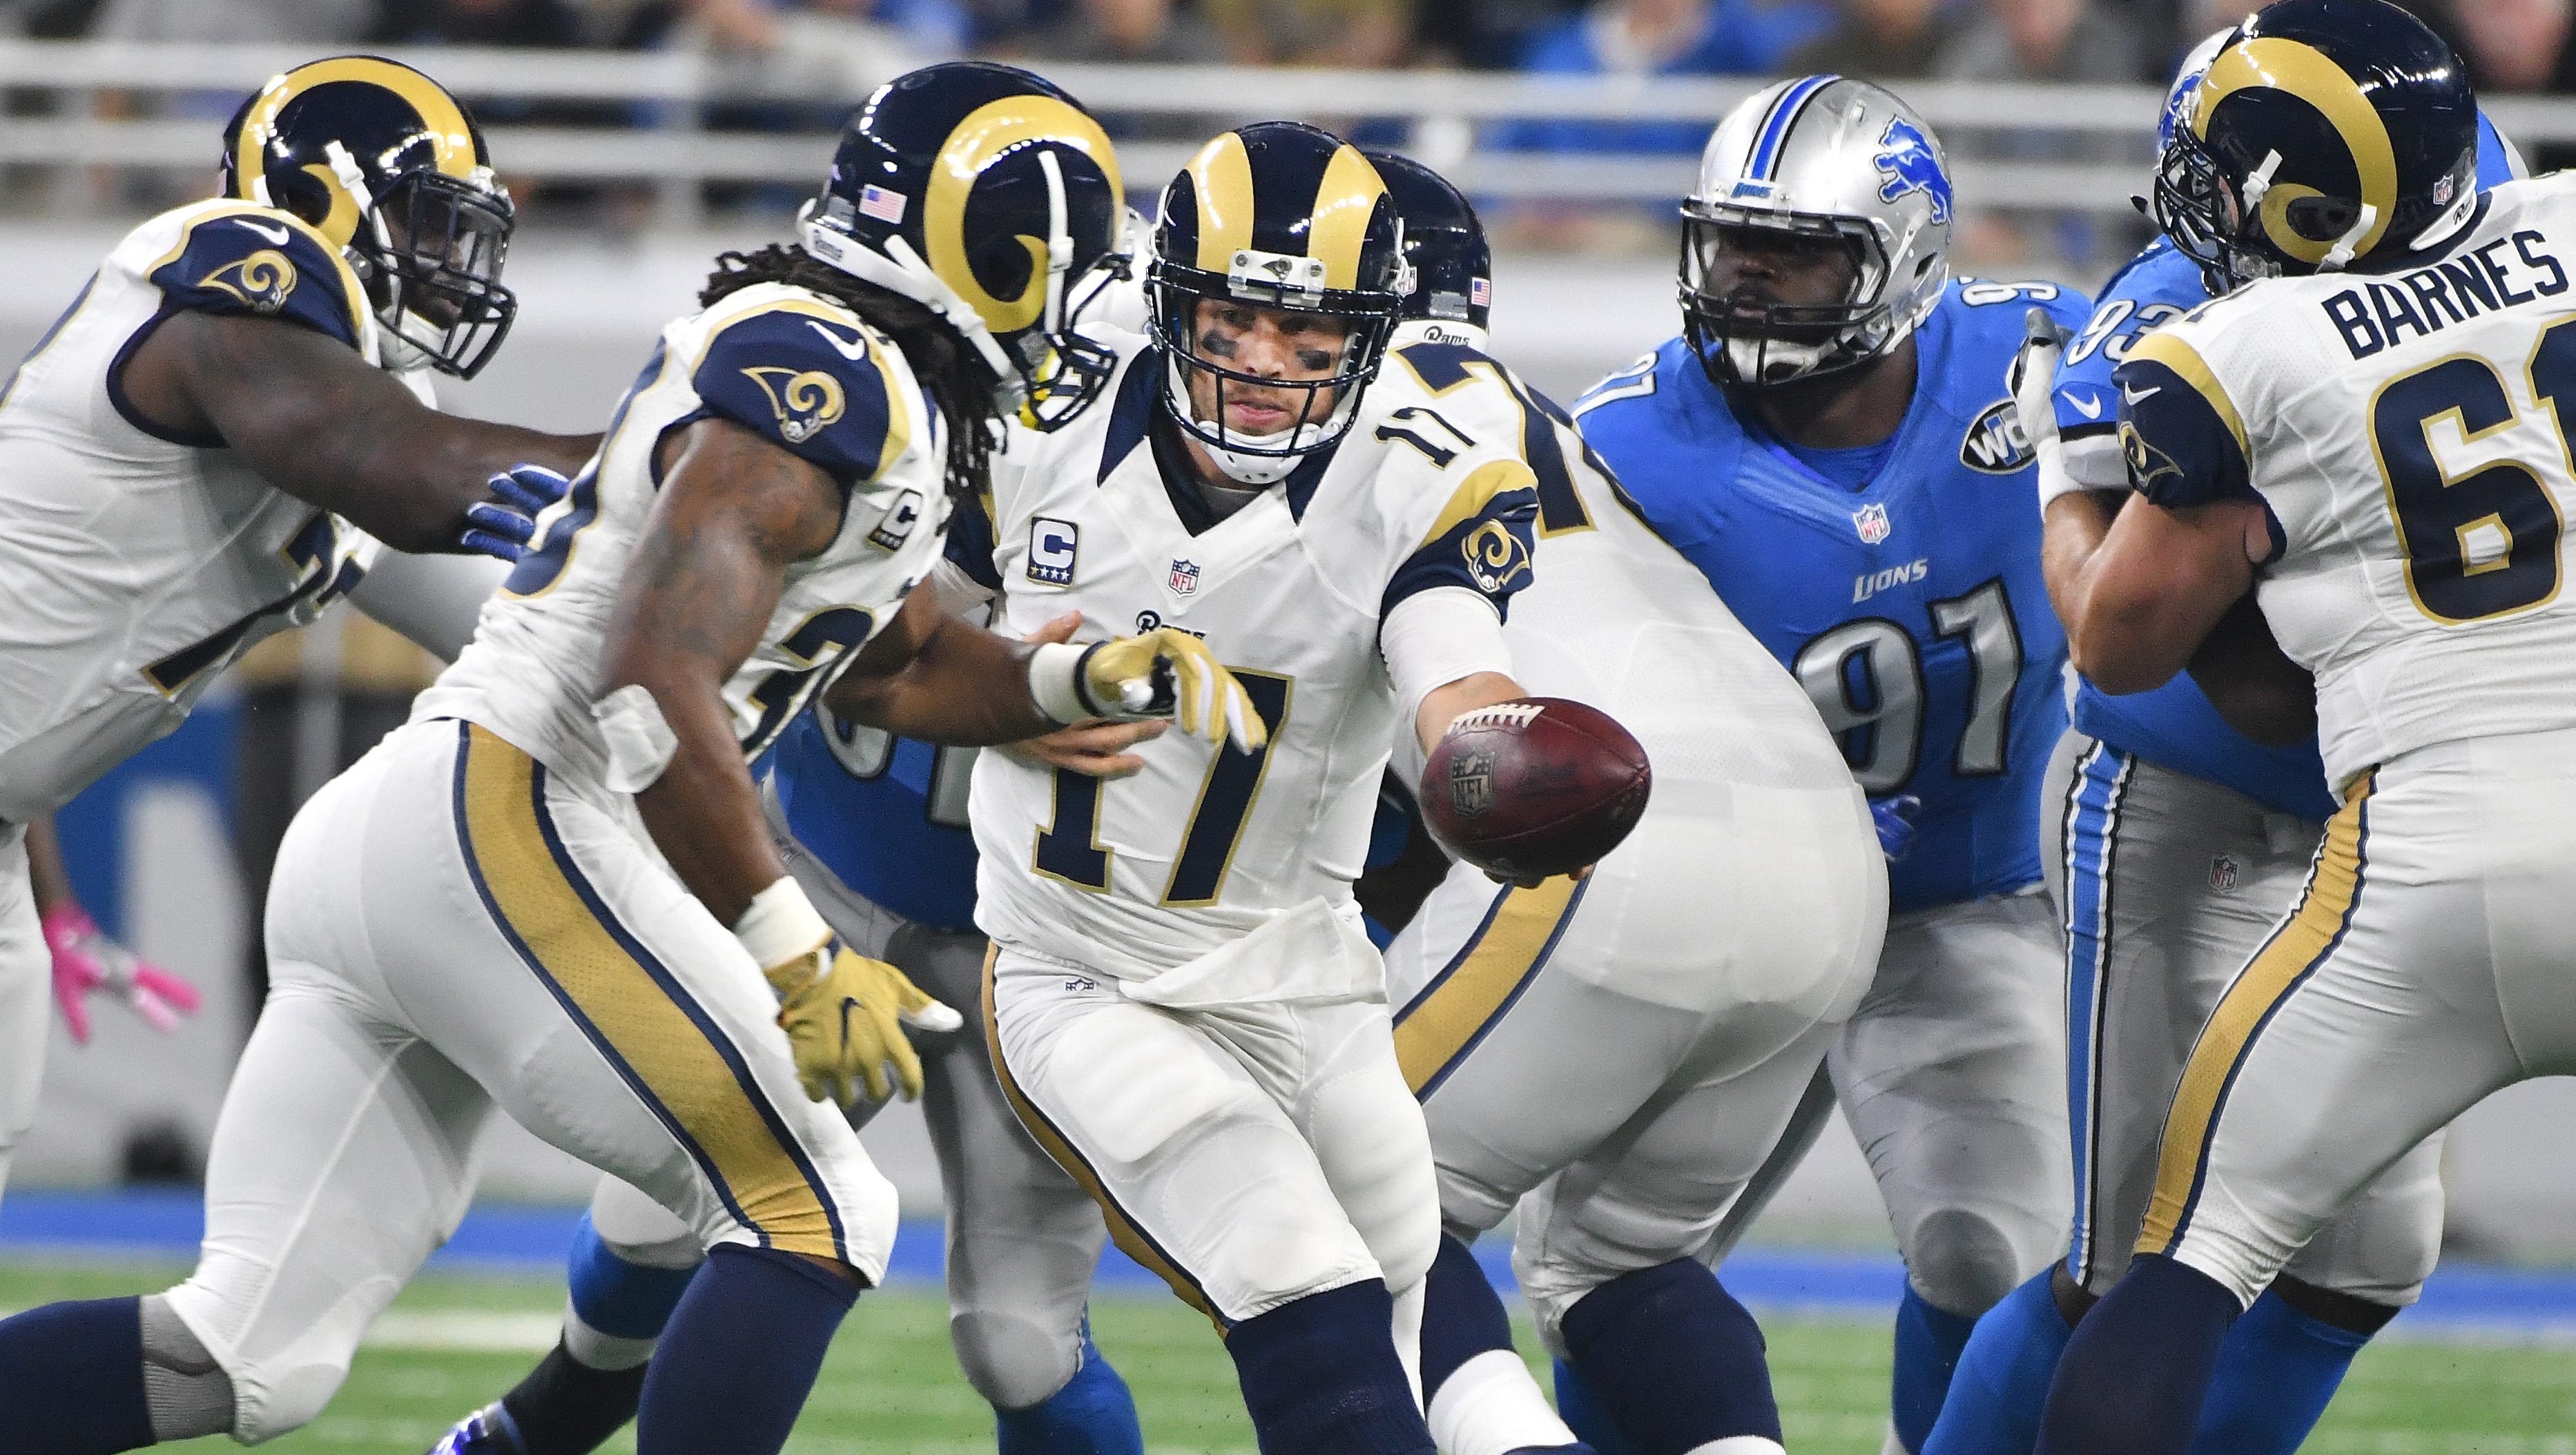 Rams quarterback Case Keenum hands off to running back Todd Gurley in the first quarter.